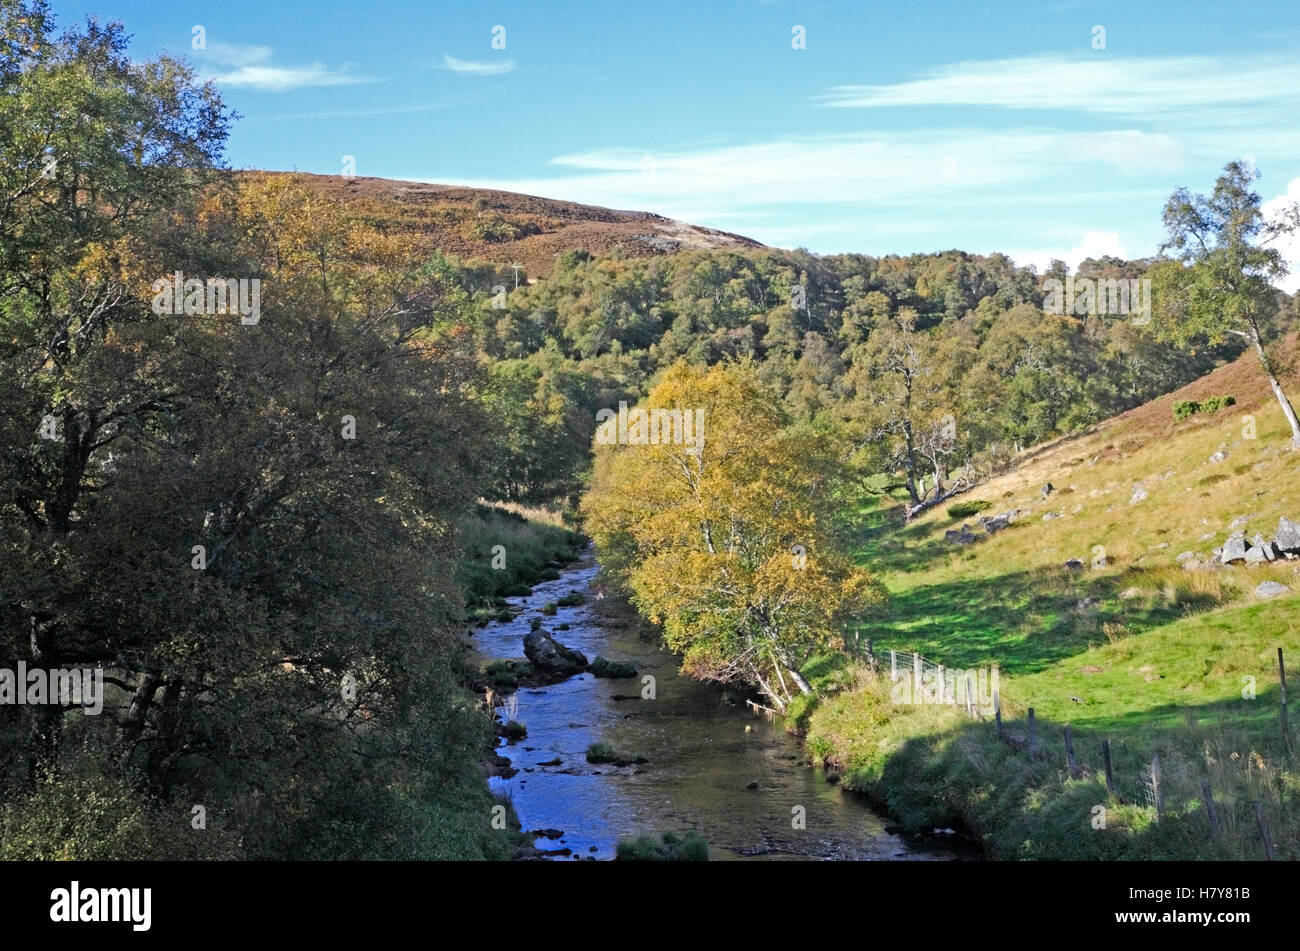 A view of the upper reaches of the River Deveron near the Cabrach, Aberdeenshire, Scotland, United Kingdom. Stock Photo